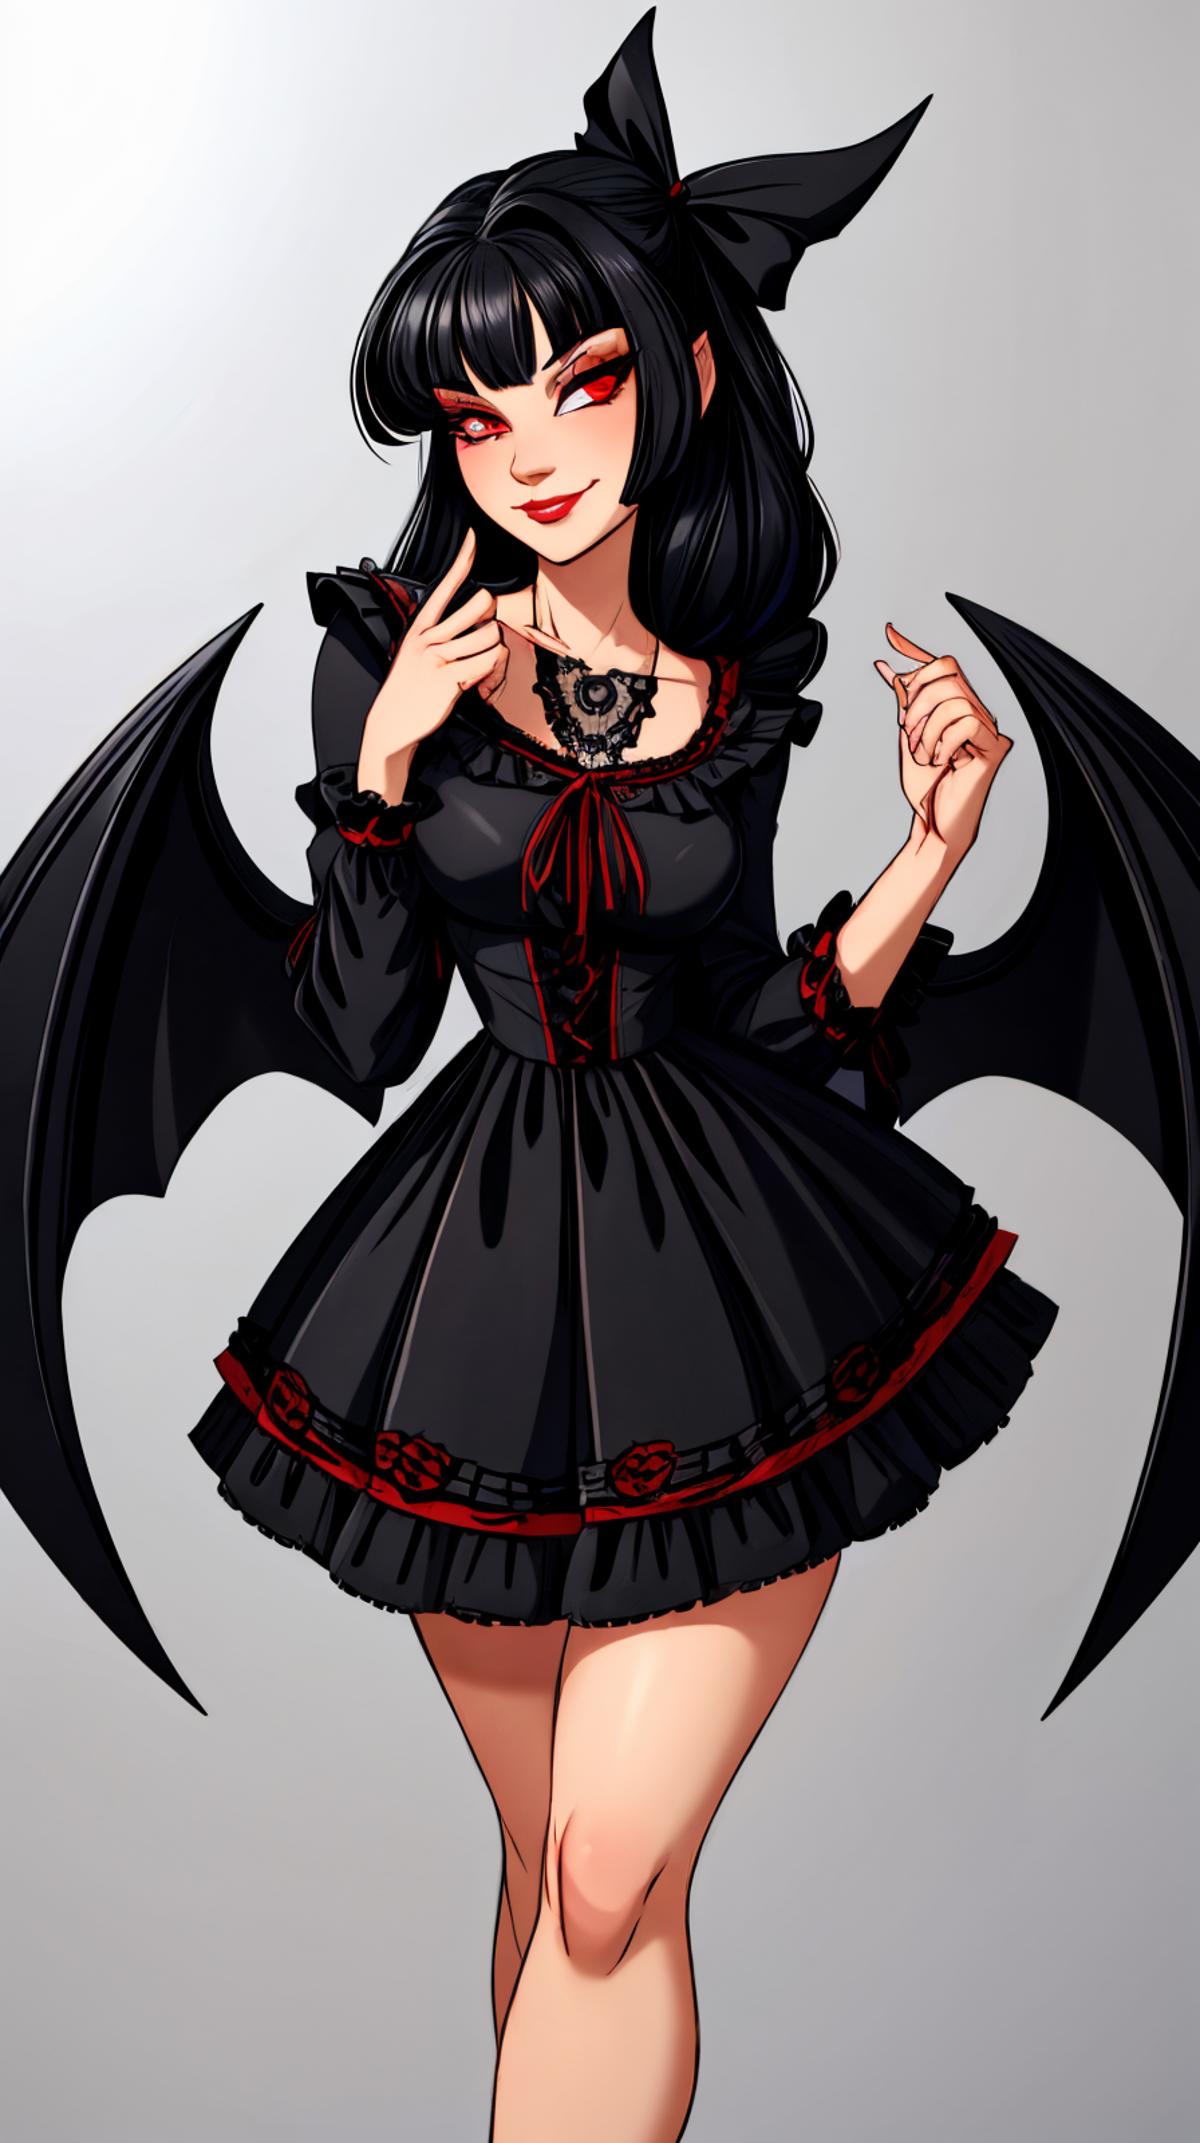 Goth Gals image by SexyToons